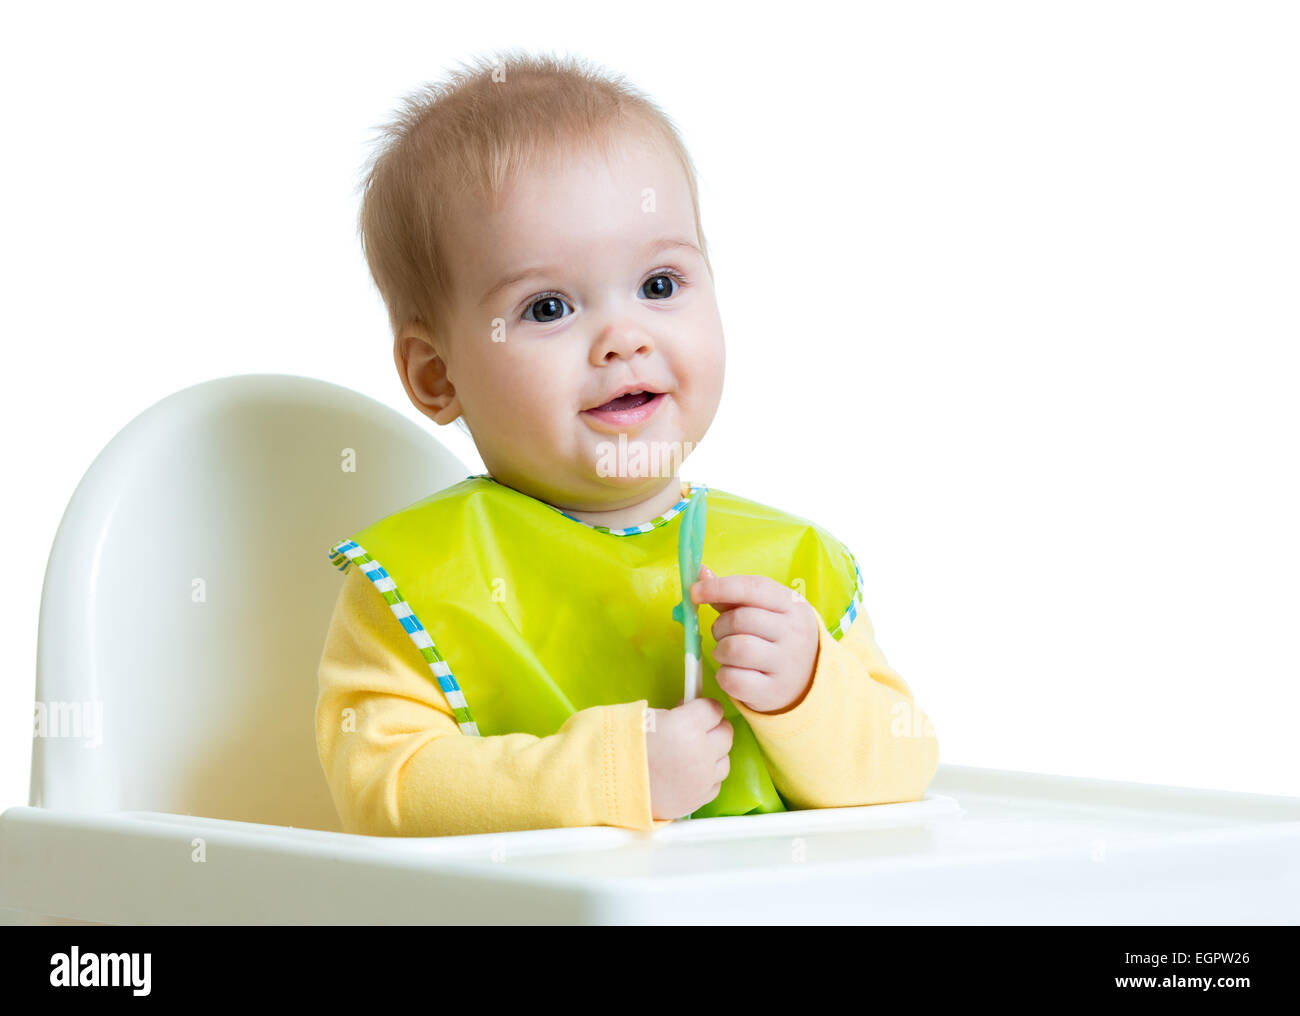 happy baby child sitting in chair with a spoon Stock Photo